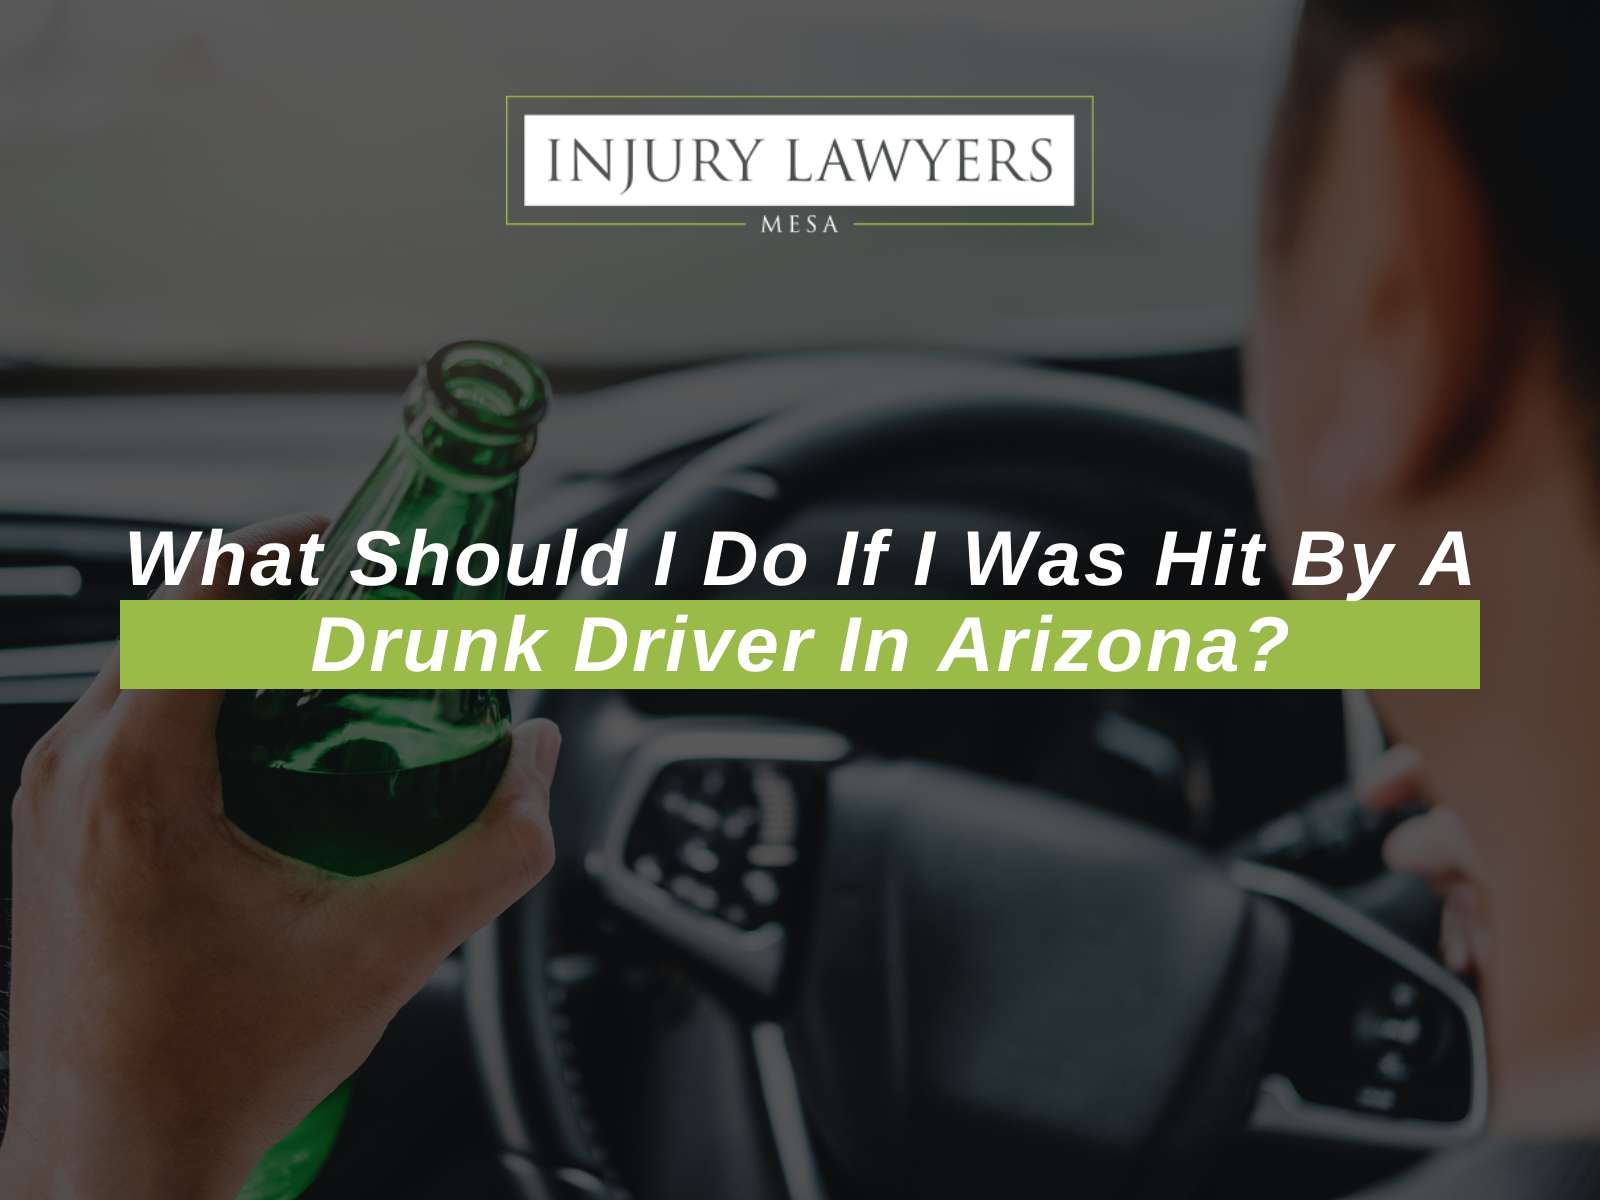 What Should I Do If I Was Hit By A Drunk Driver In Arizona